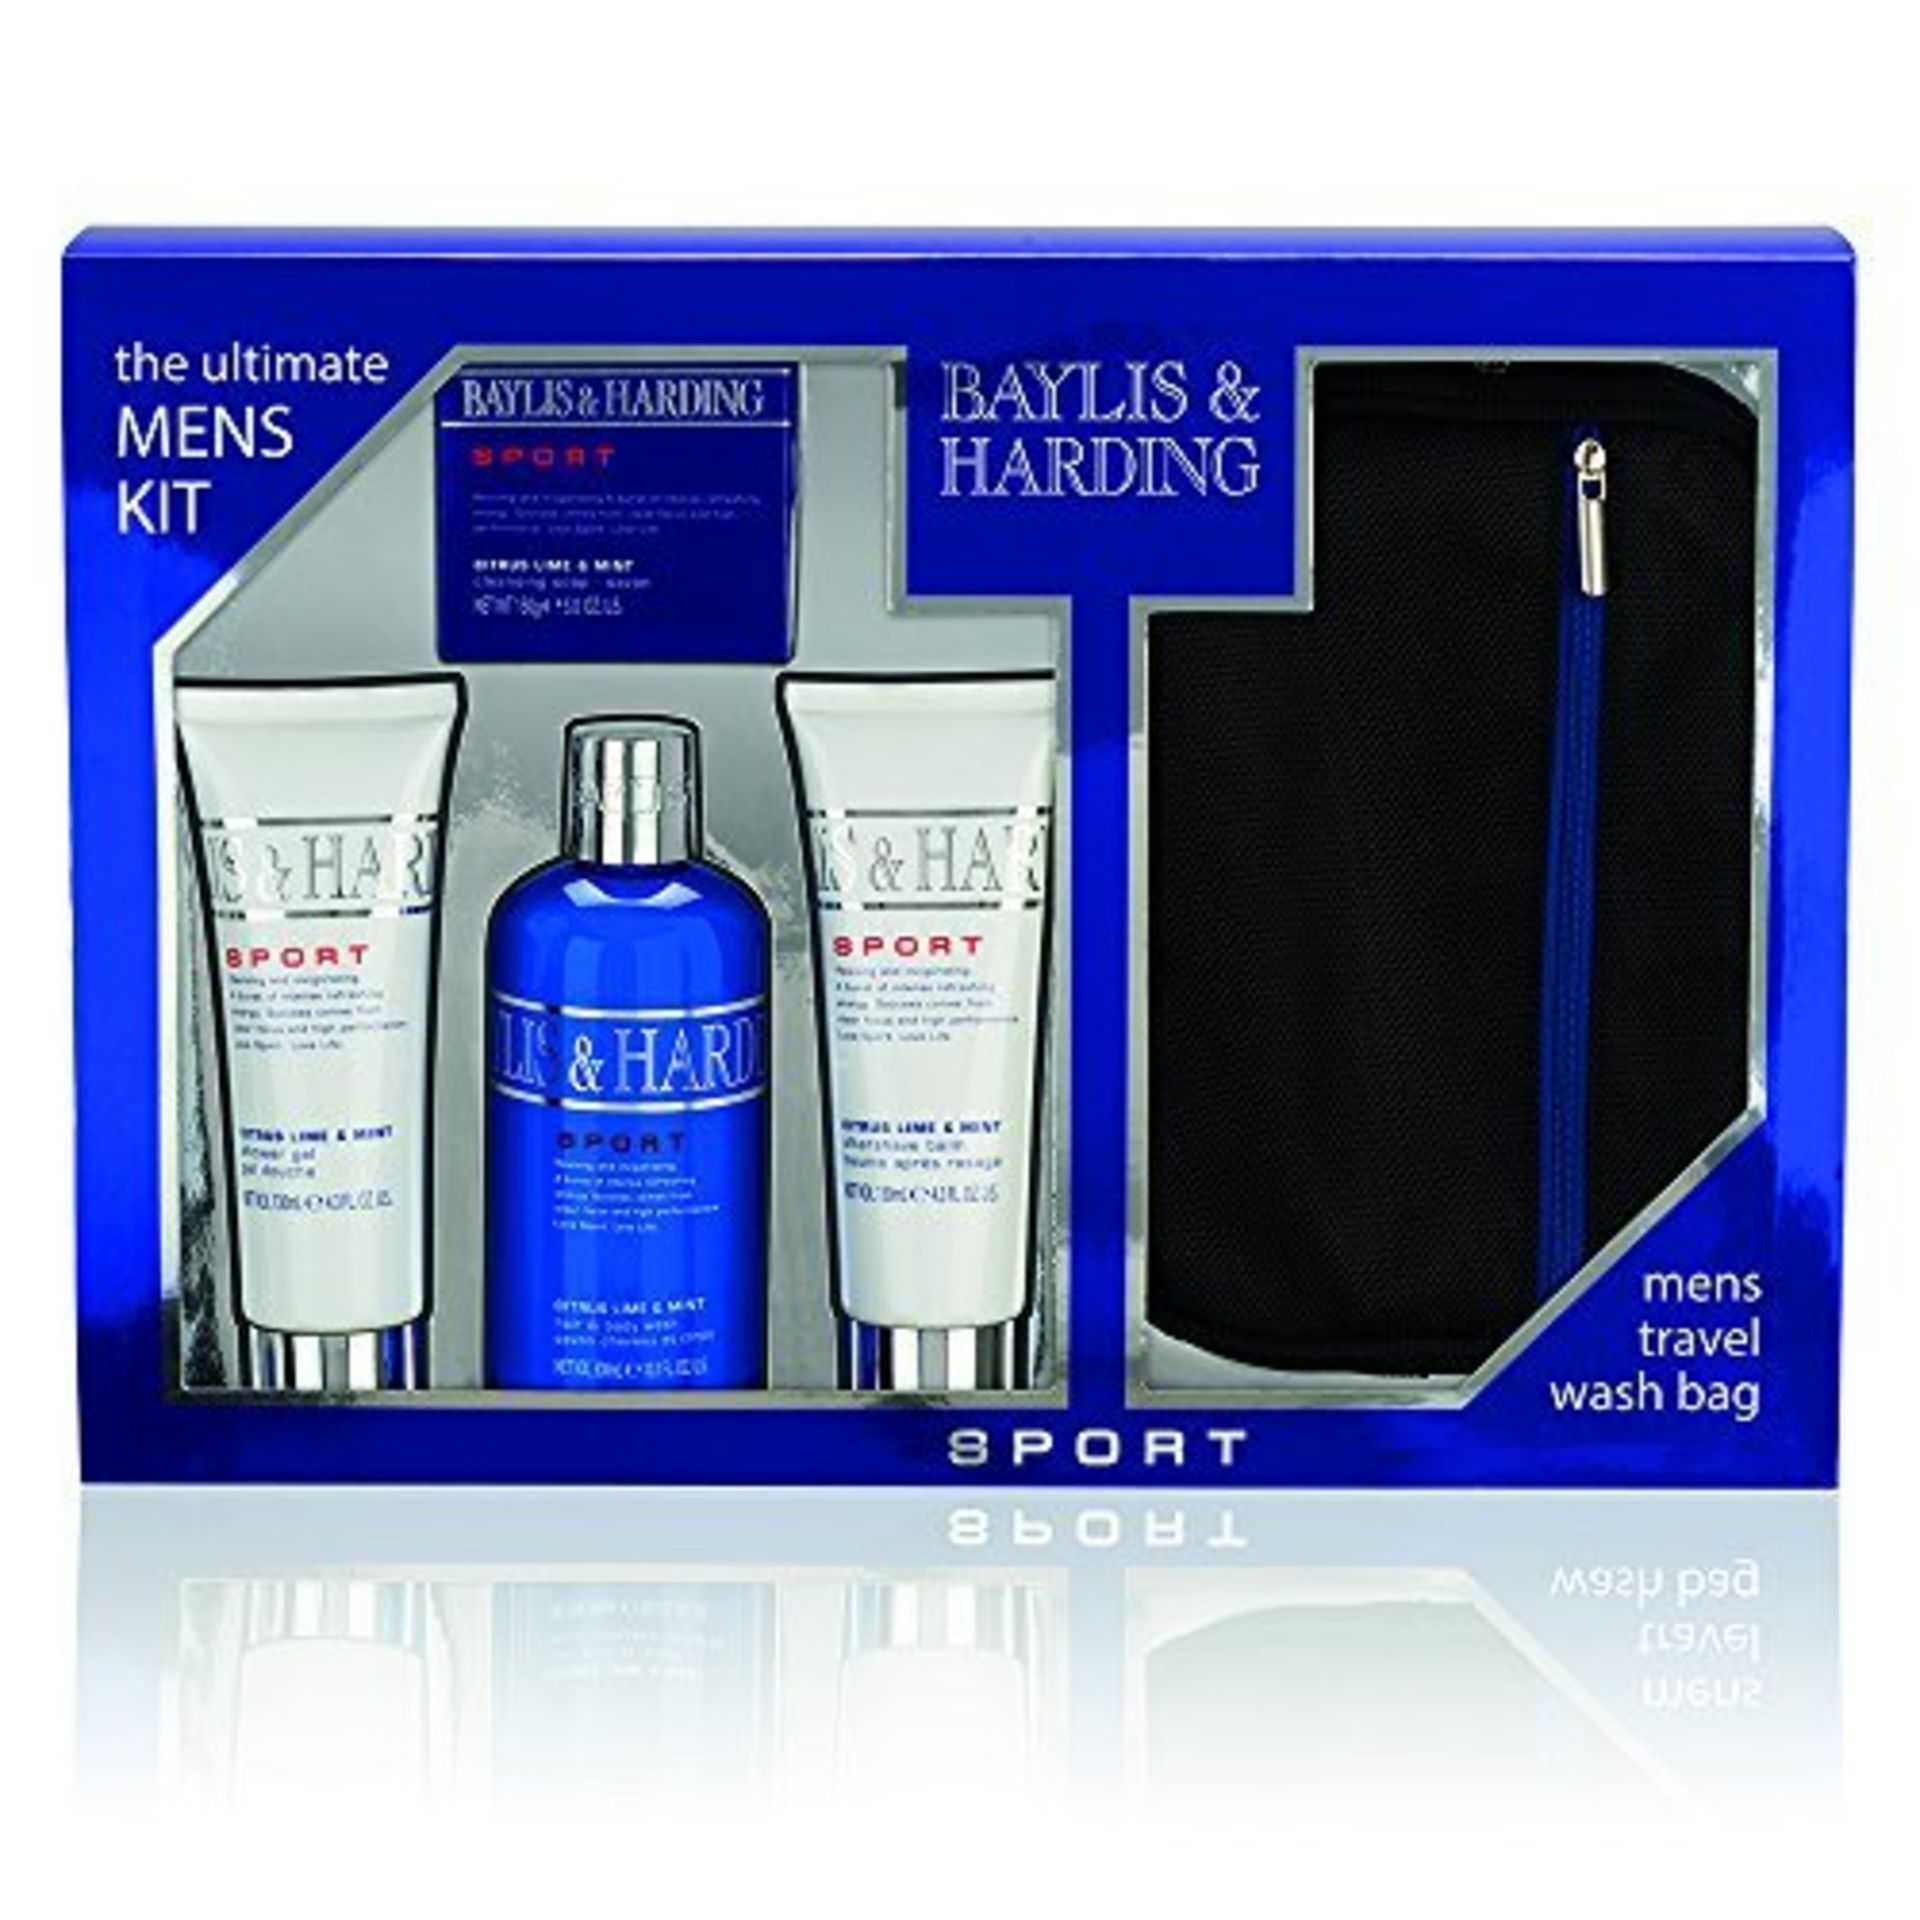 V Brand New Four Gift Sets - Baylis and Harding The Ultimate Men's Kit Including 1 x 300ml Hair - Image 2 of 2